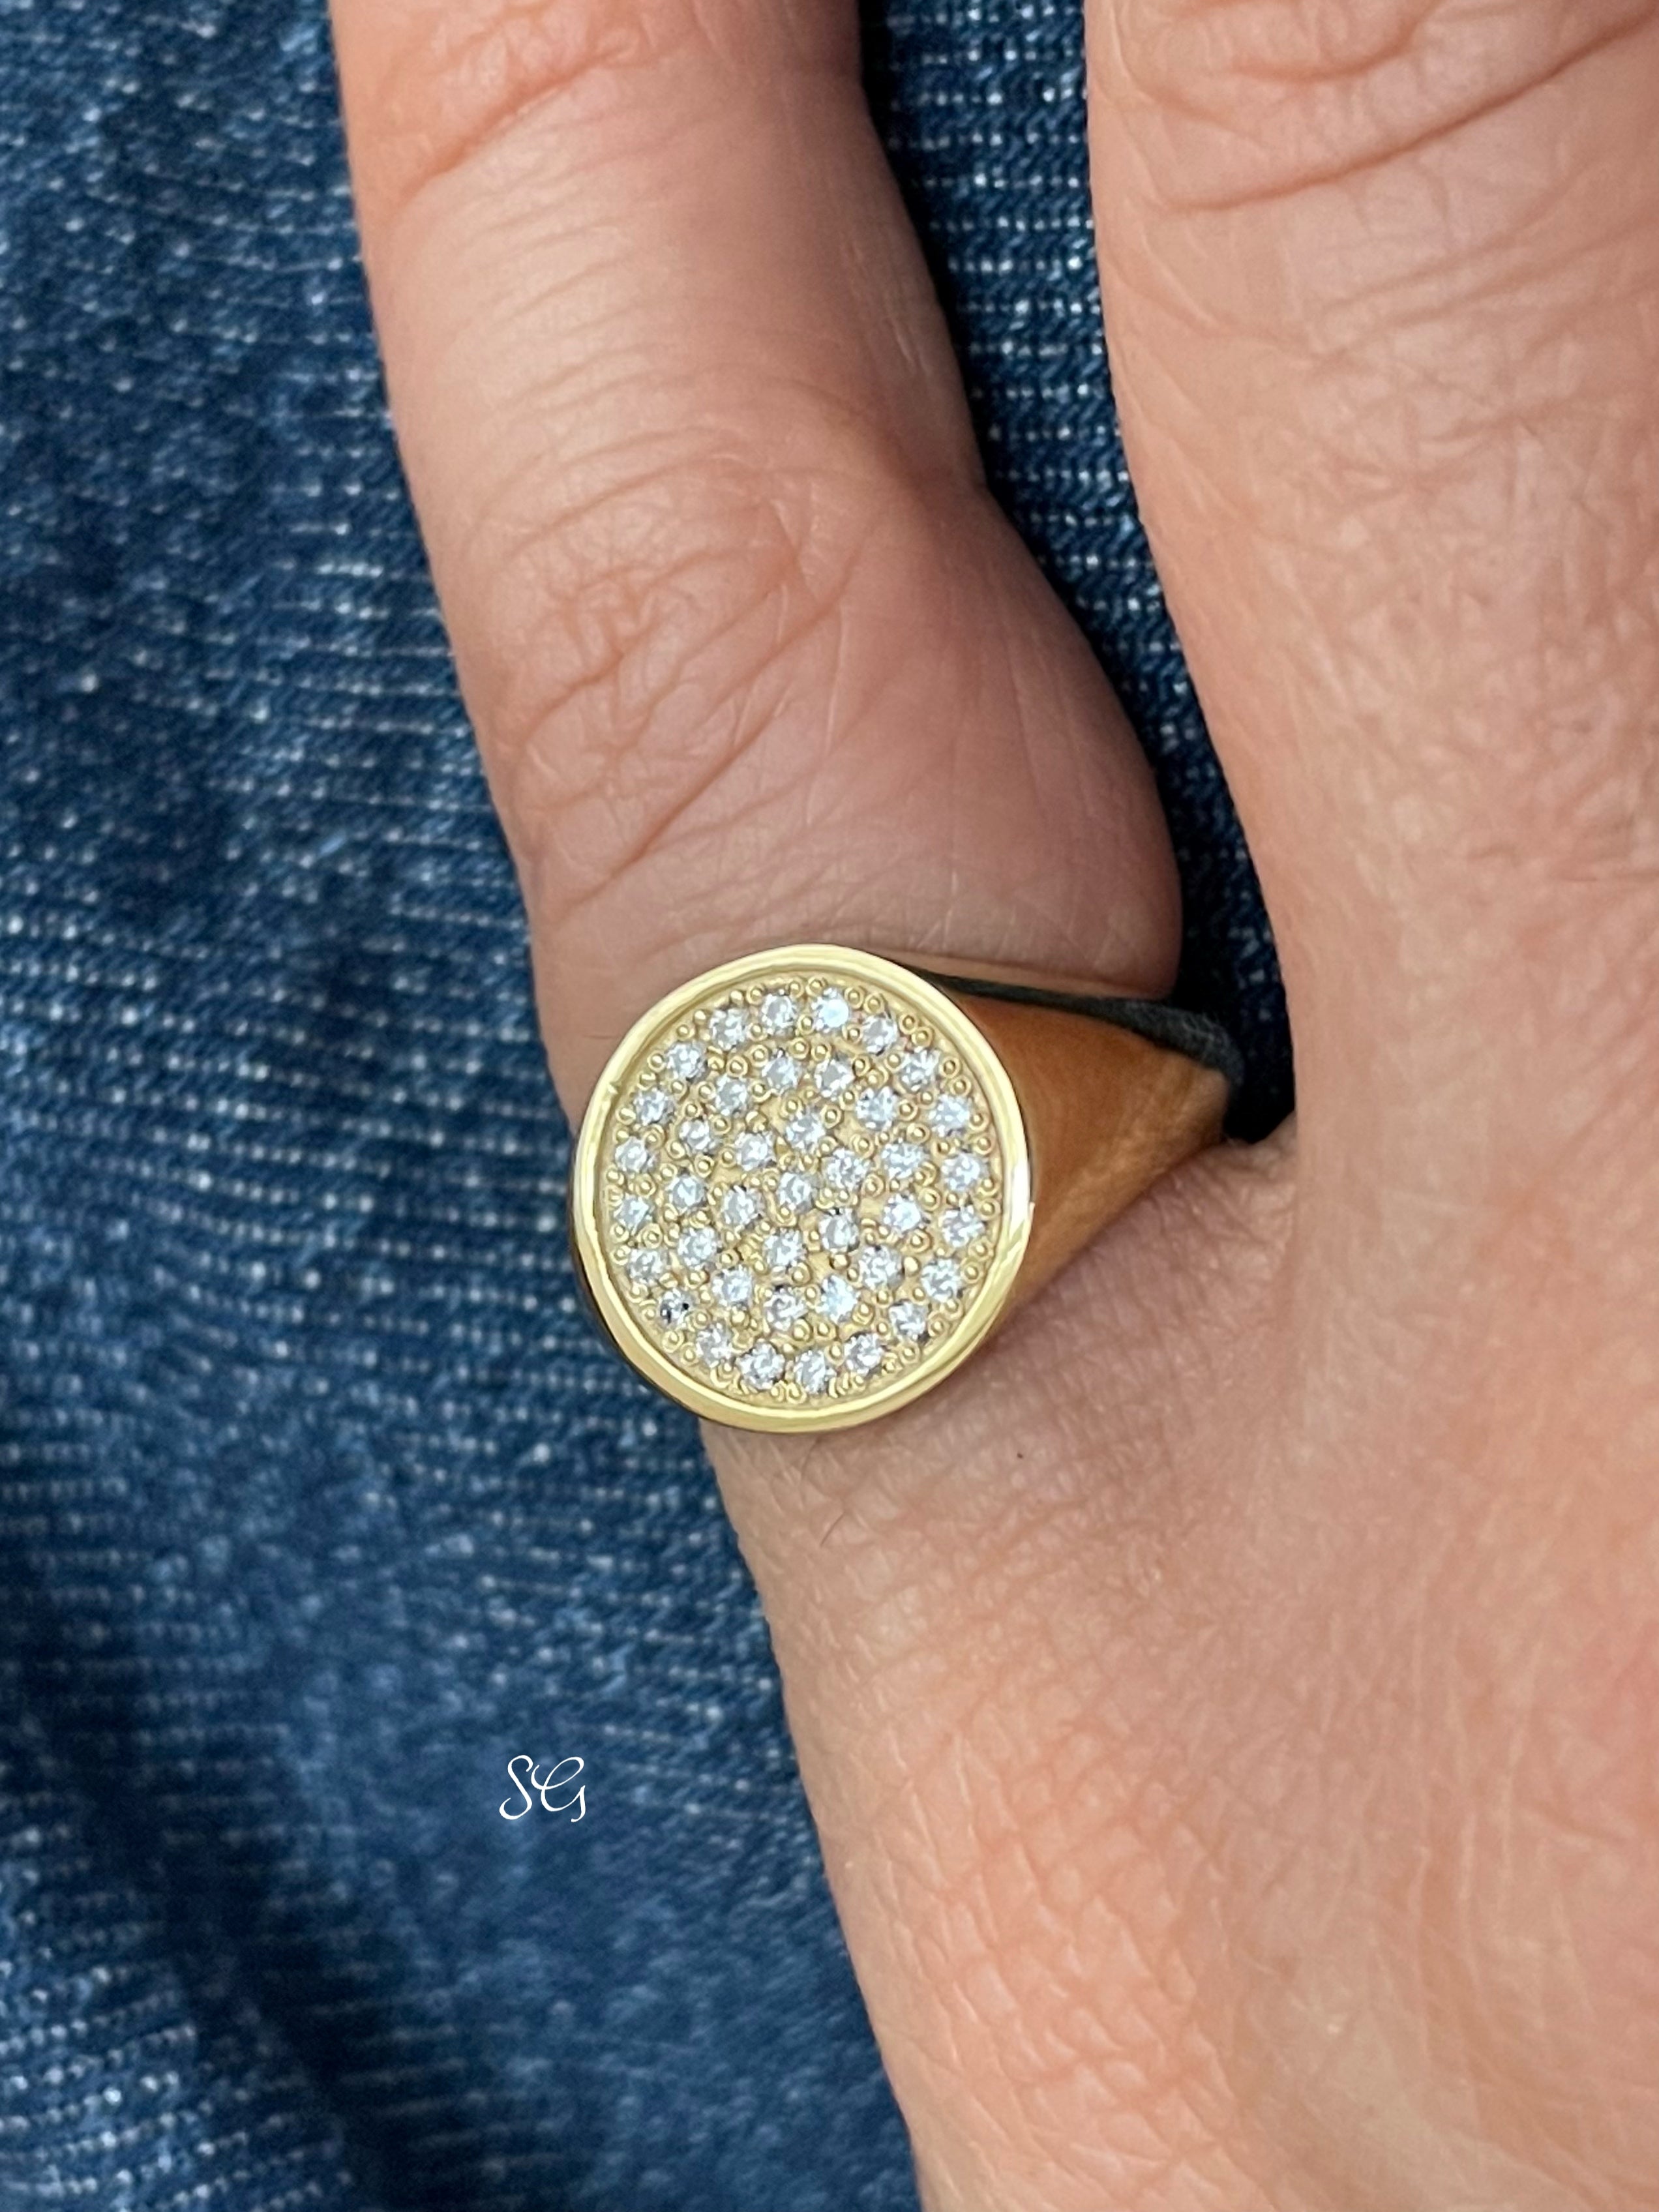 22K Gold Ladies Ring - RiLs26652 - US$ 298 - 22K Gold Ladies Ring is  beautifully designed in an elegant pattern with OM with studded cubic zircon